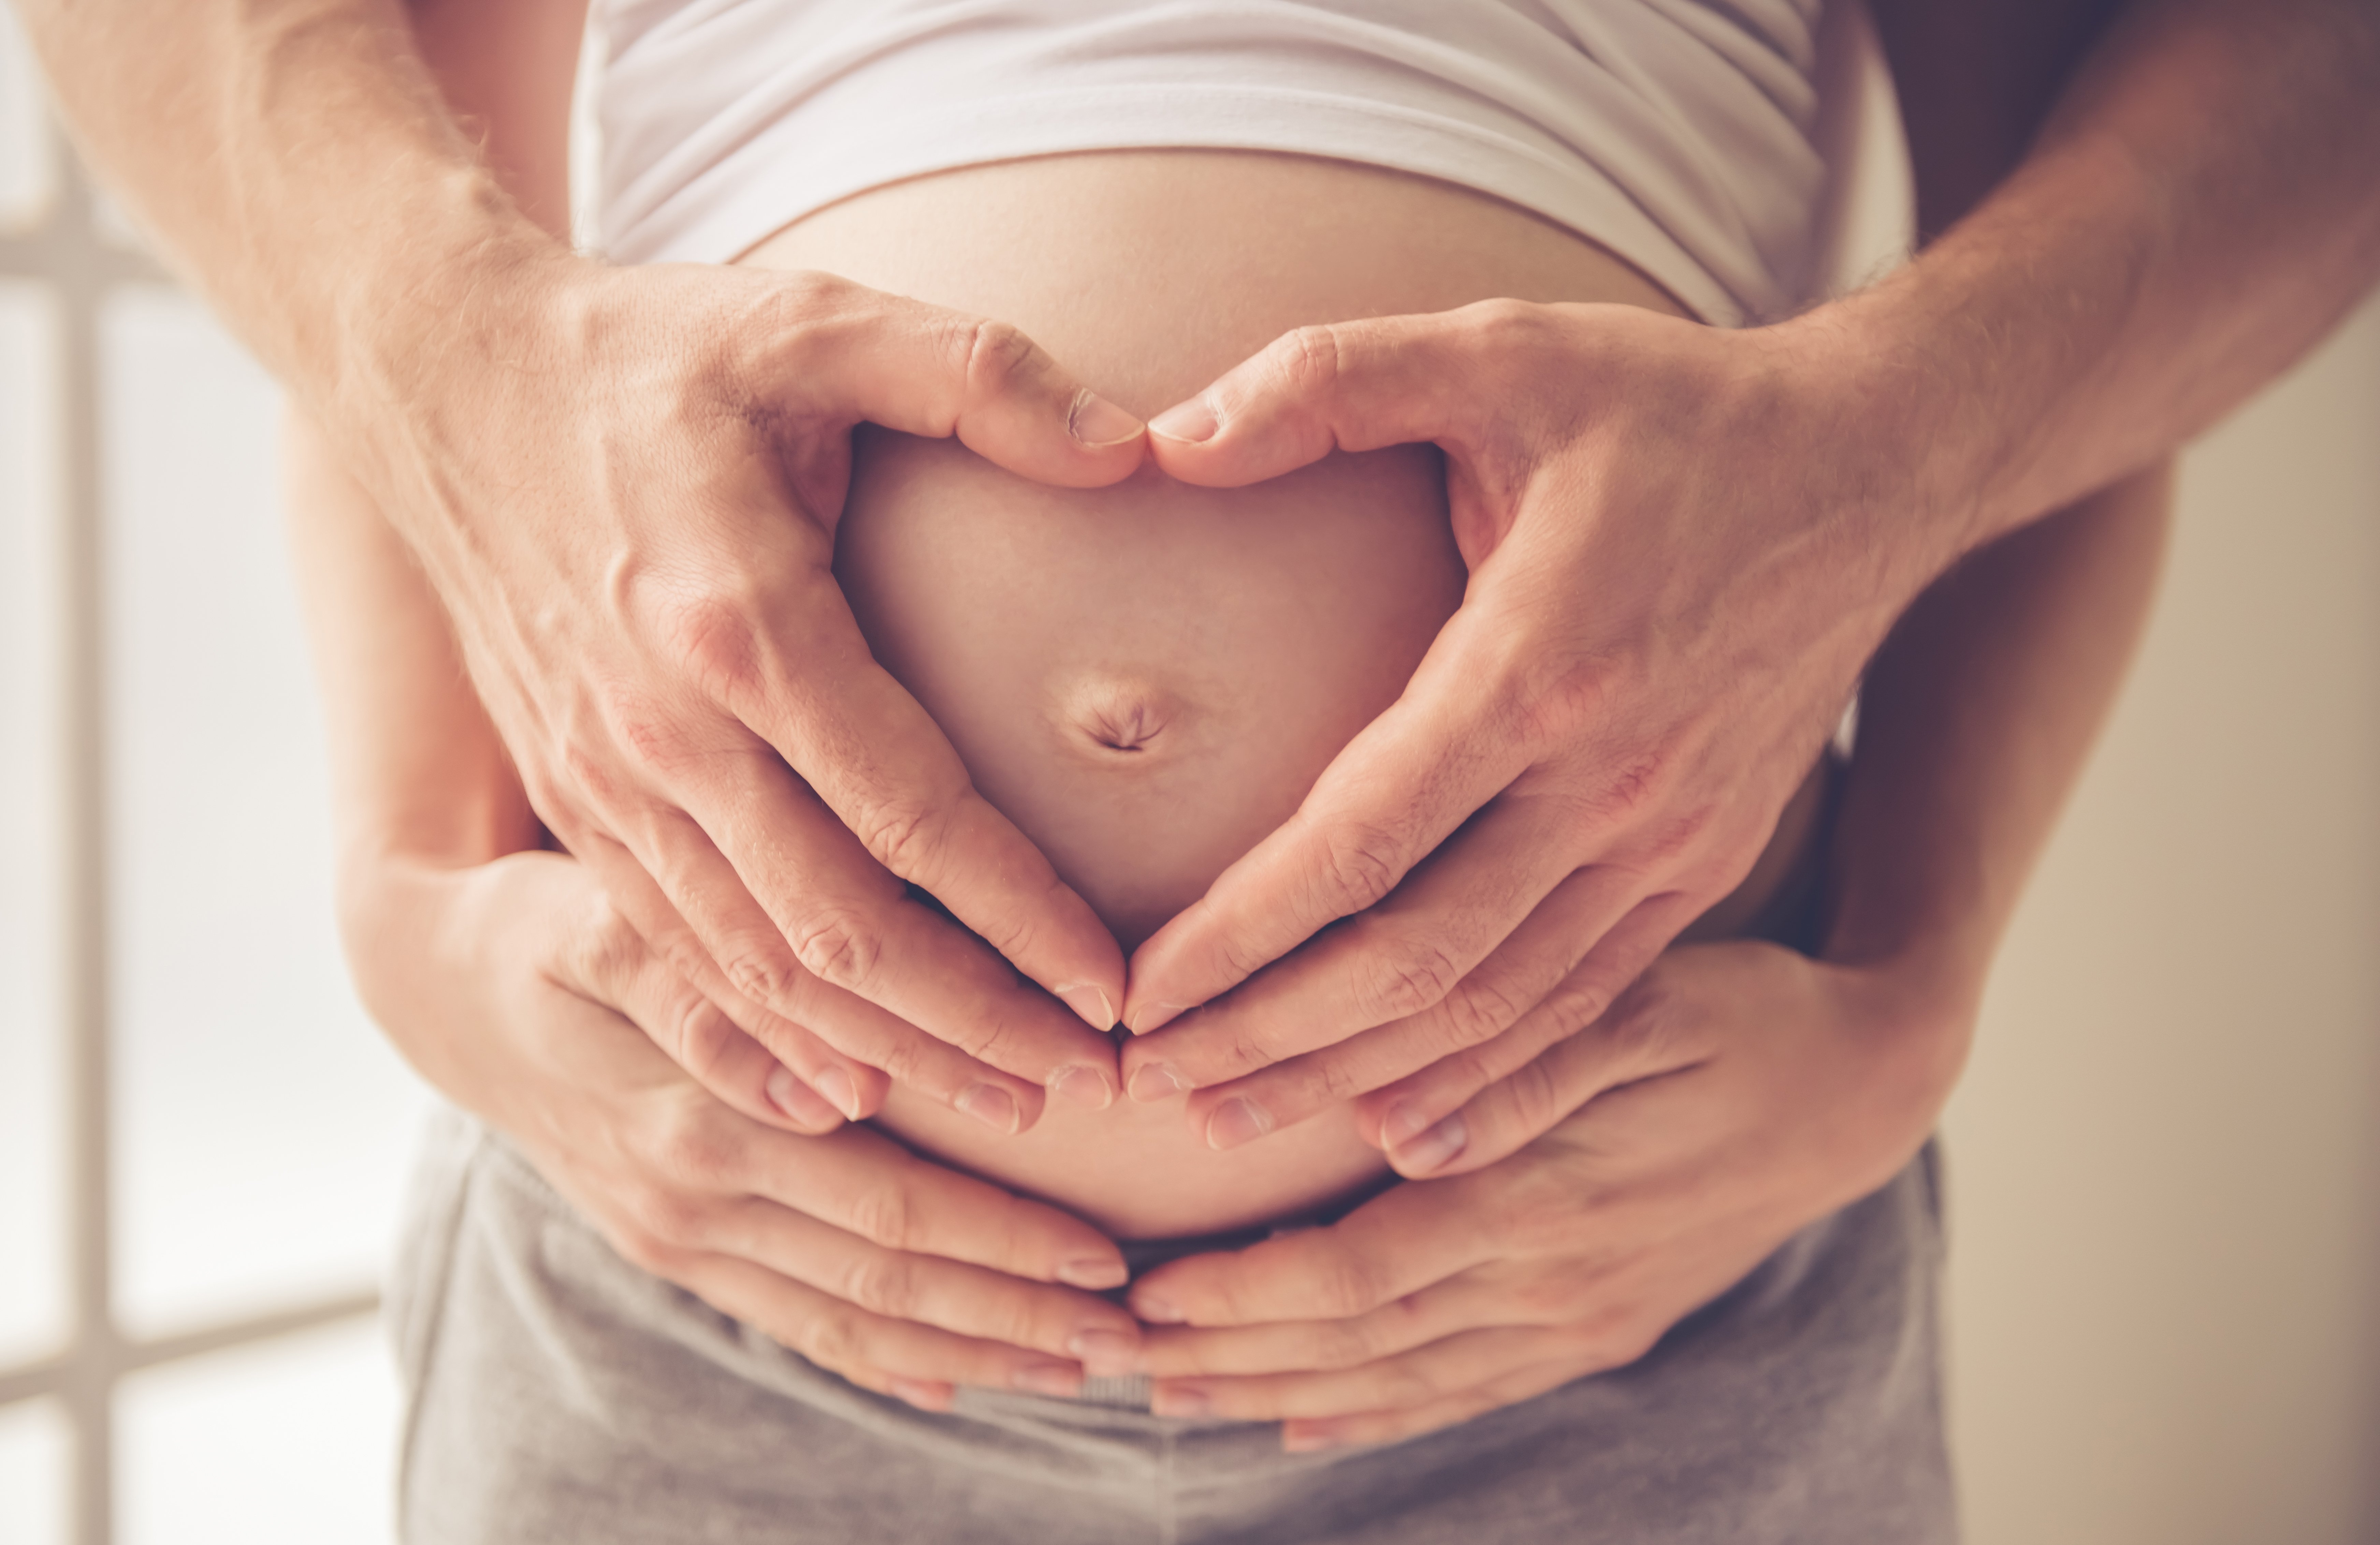 Hands on pregnant stomach | Source: Shutterstock